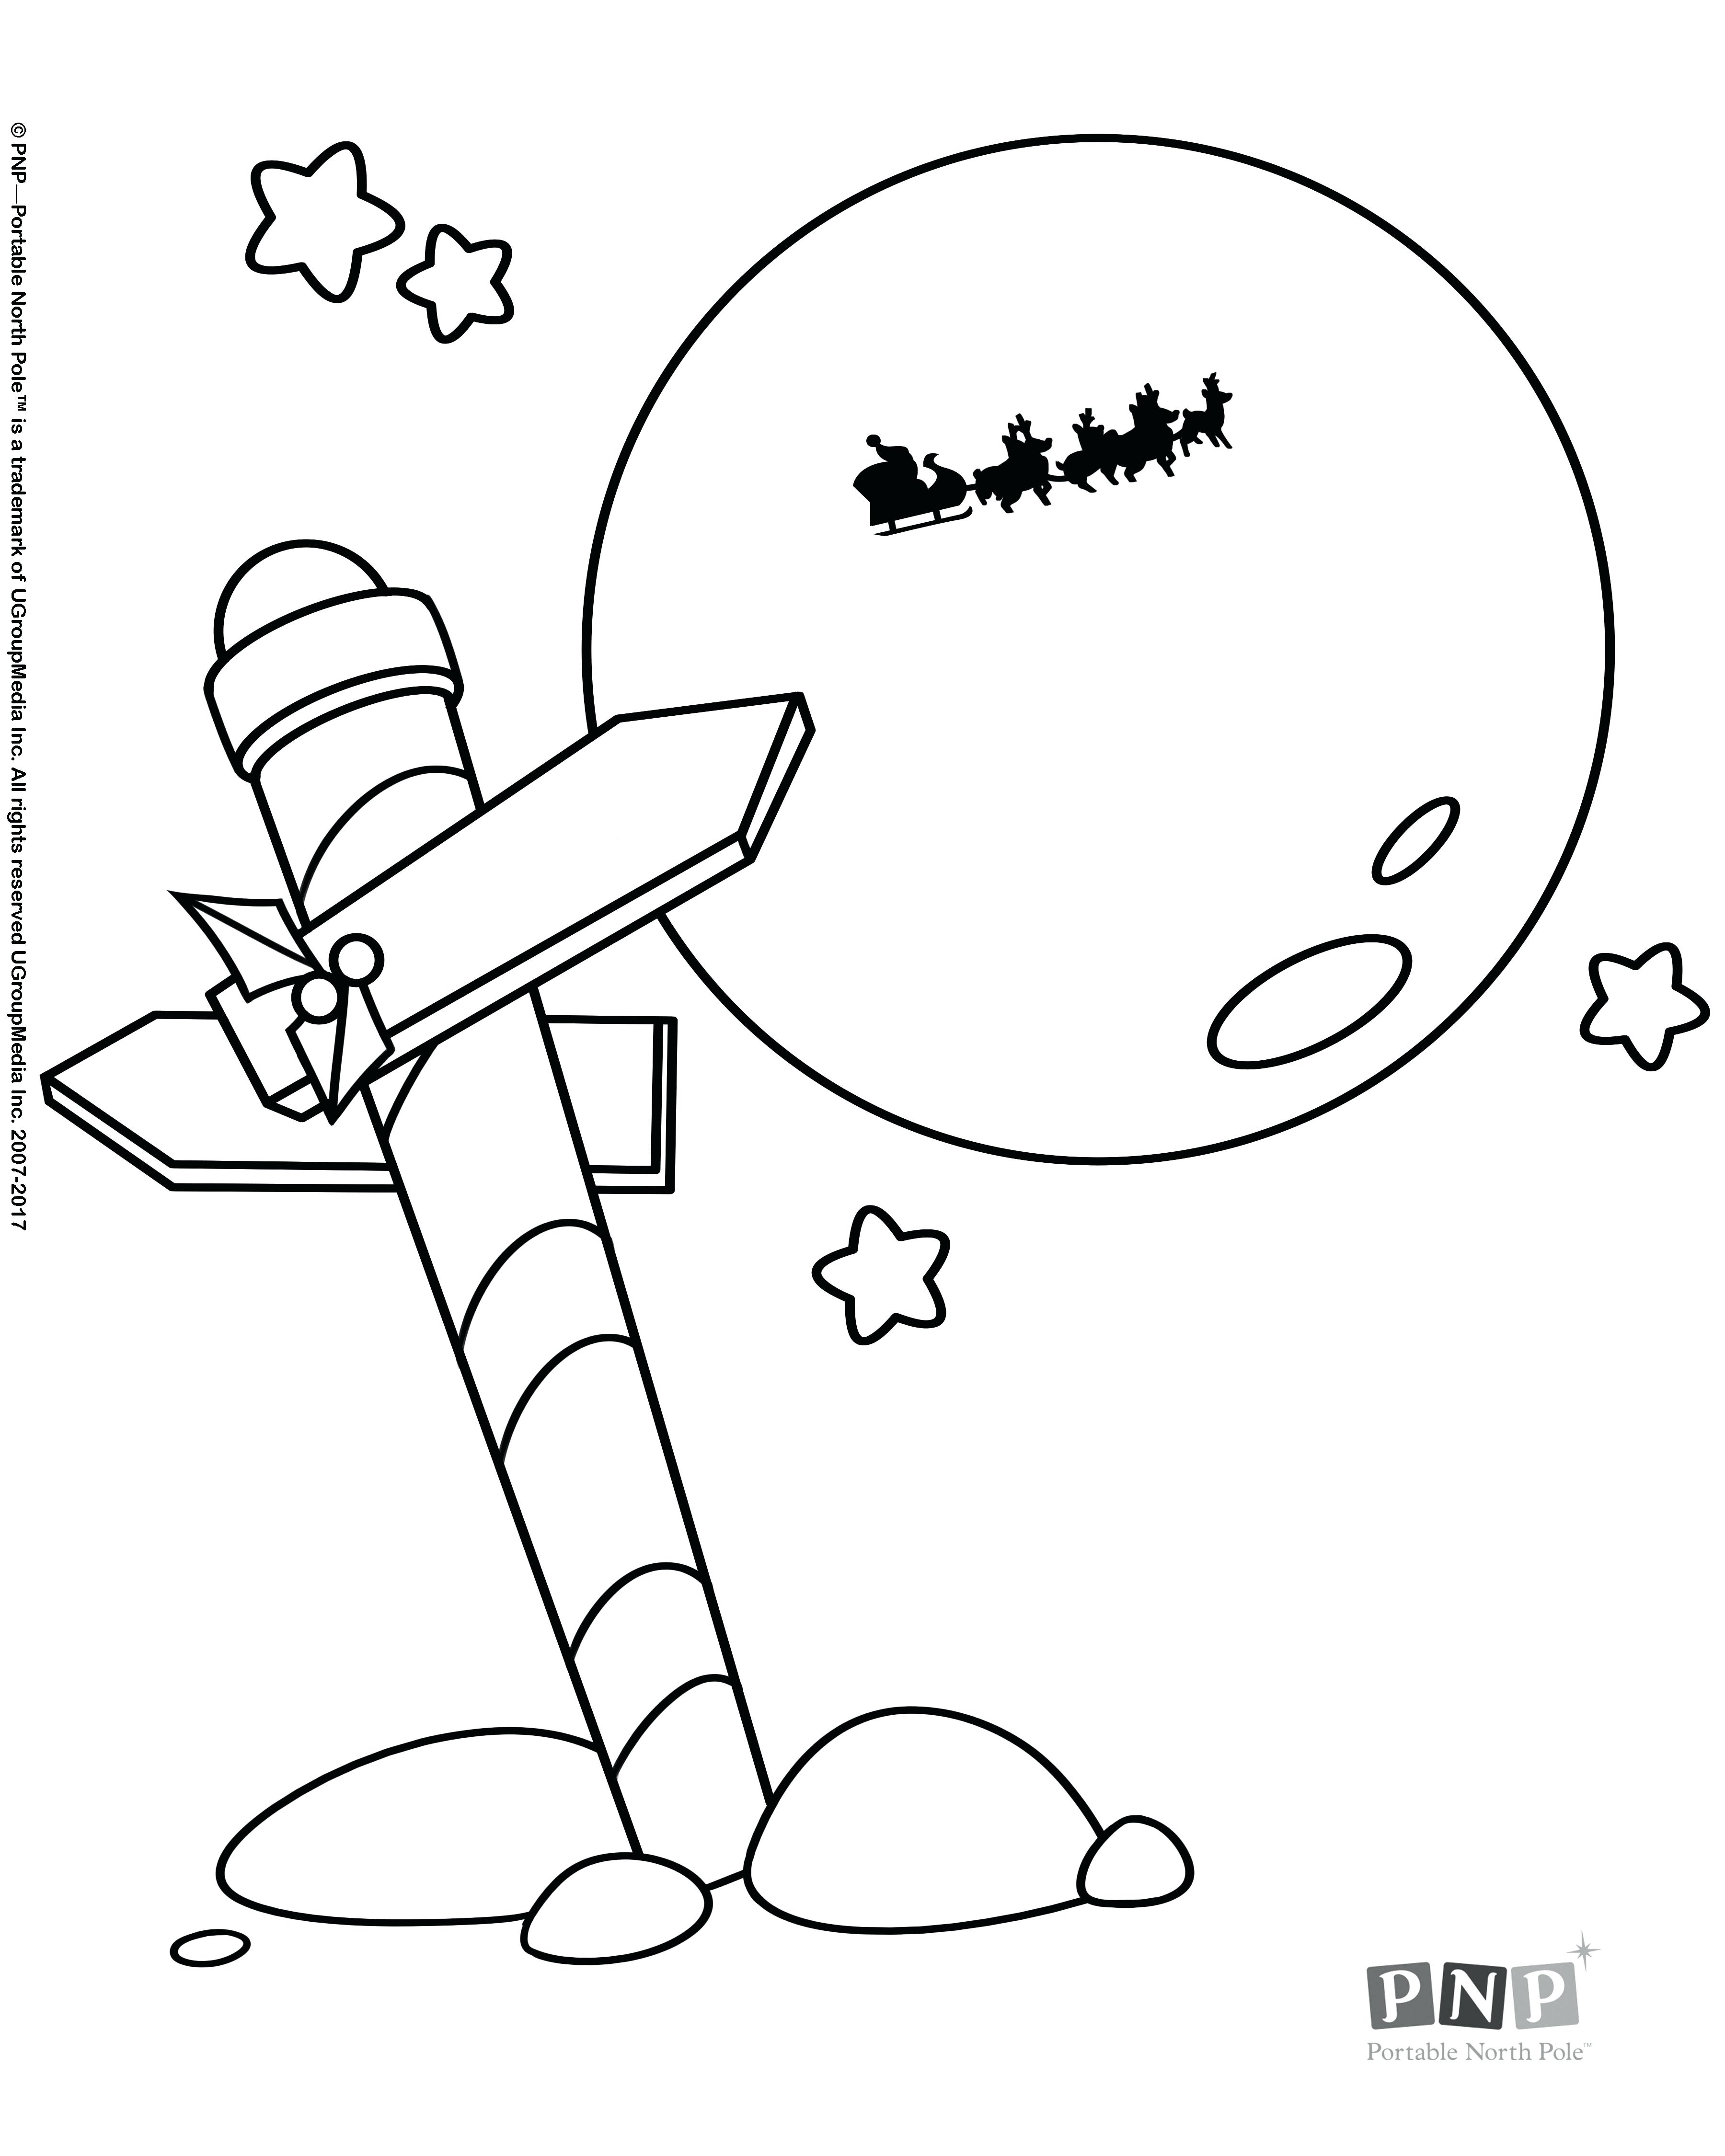 Cute North Pole Coloring Page for Kindergarten